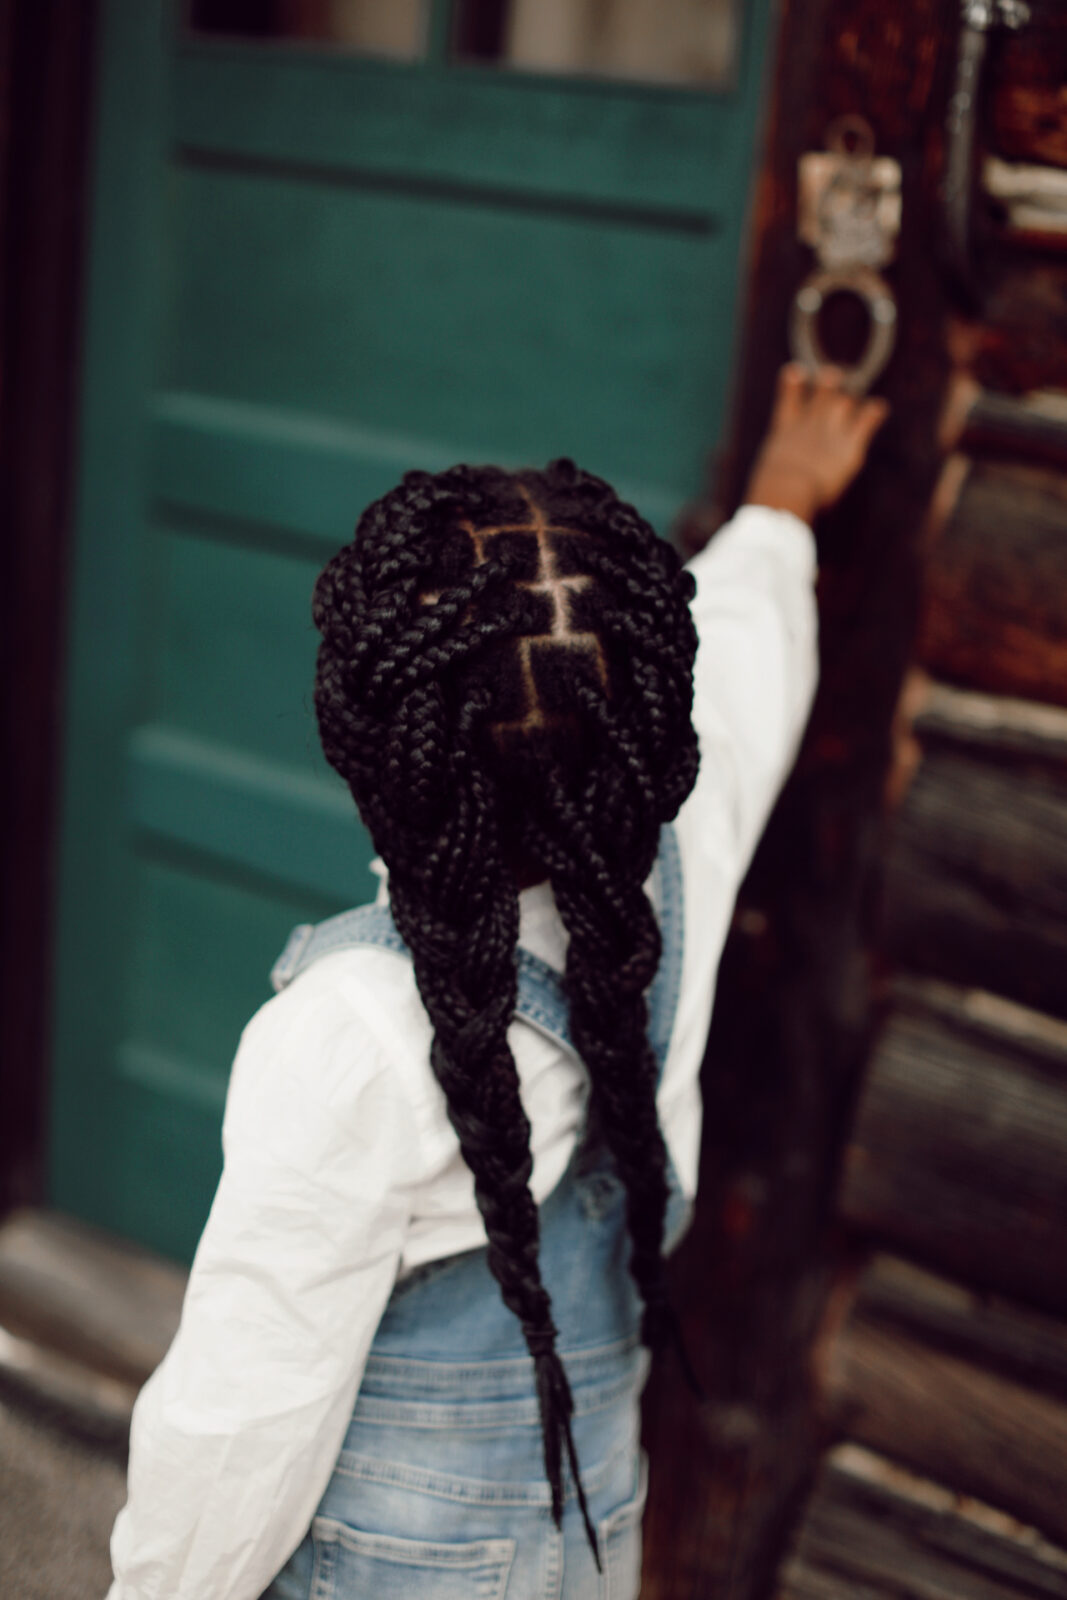 The 14 Different Types of Braids and How to Create Them, According to  Stylists